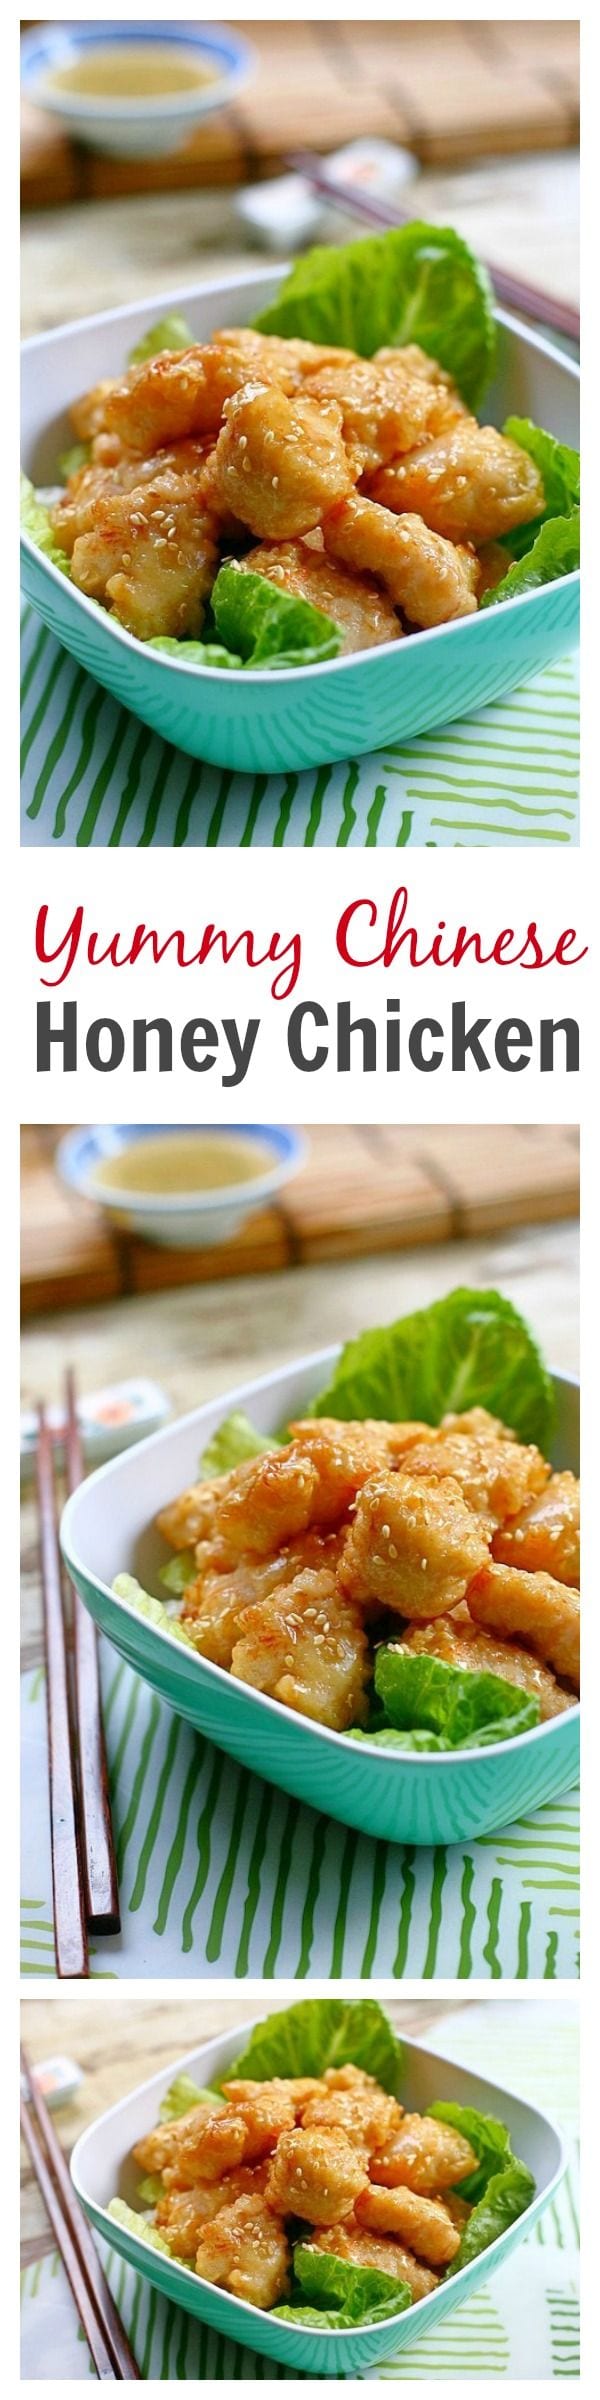 Super yummy Chinese honey chicken. Crispy chicken pieces coated with sweet and sticky honey sauce. To-die-for recipe that you can make at home | rasamalaysia.com